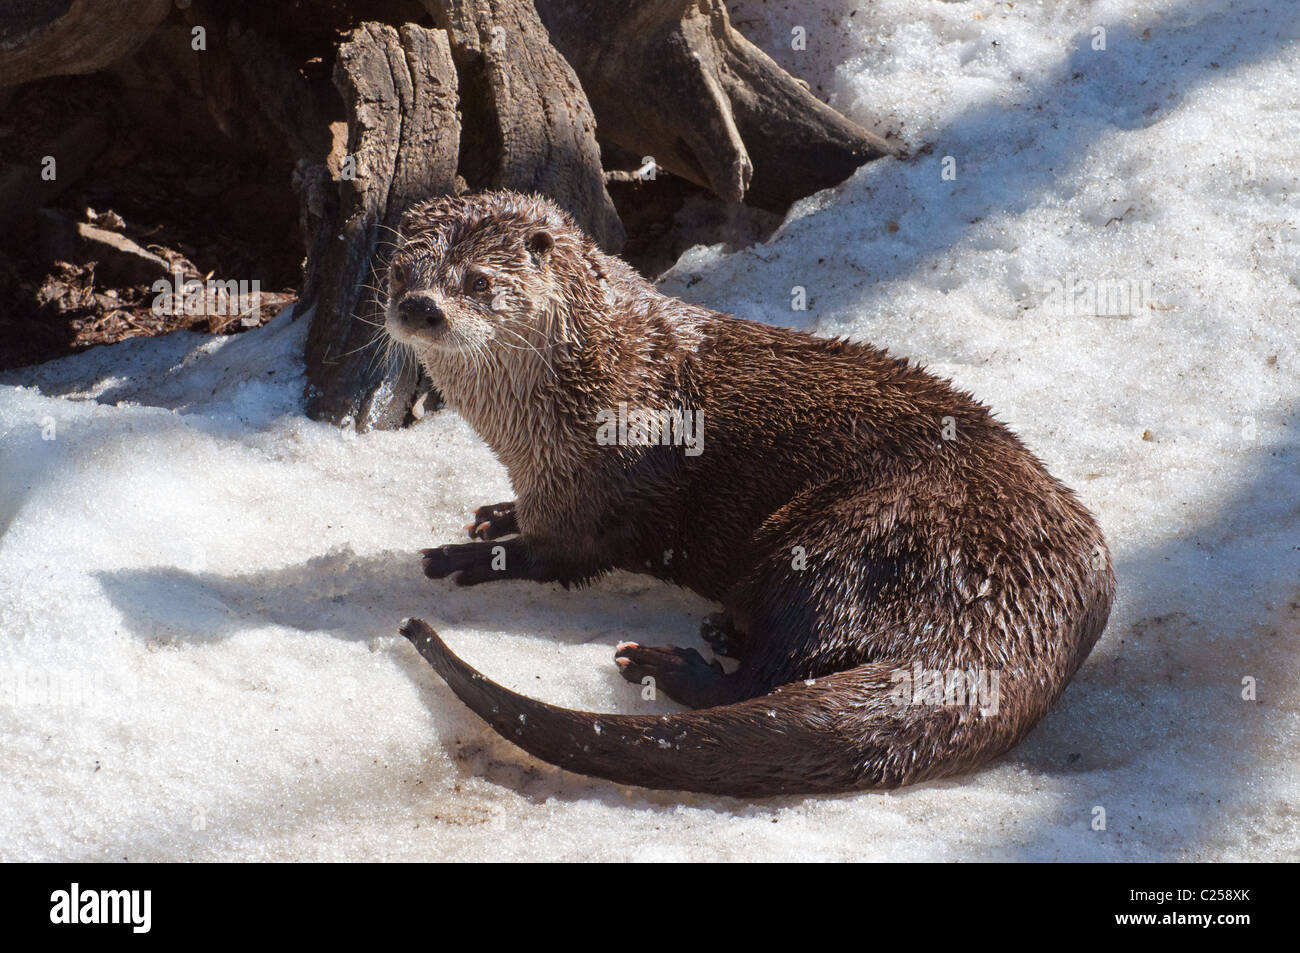 Close-up of a Northern River Otter Stock Photo